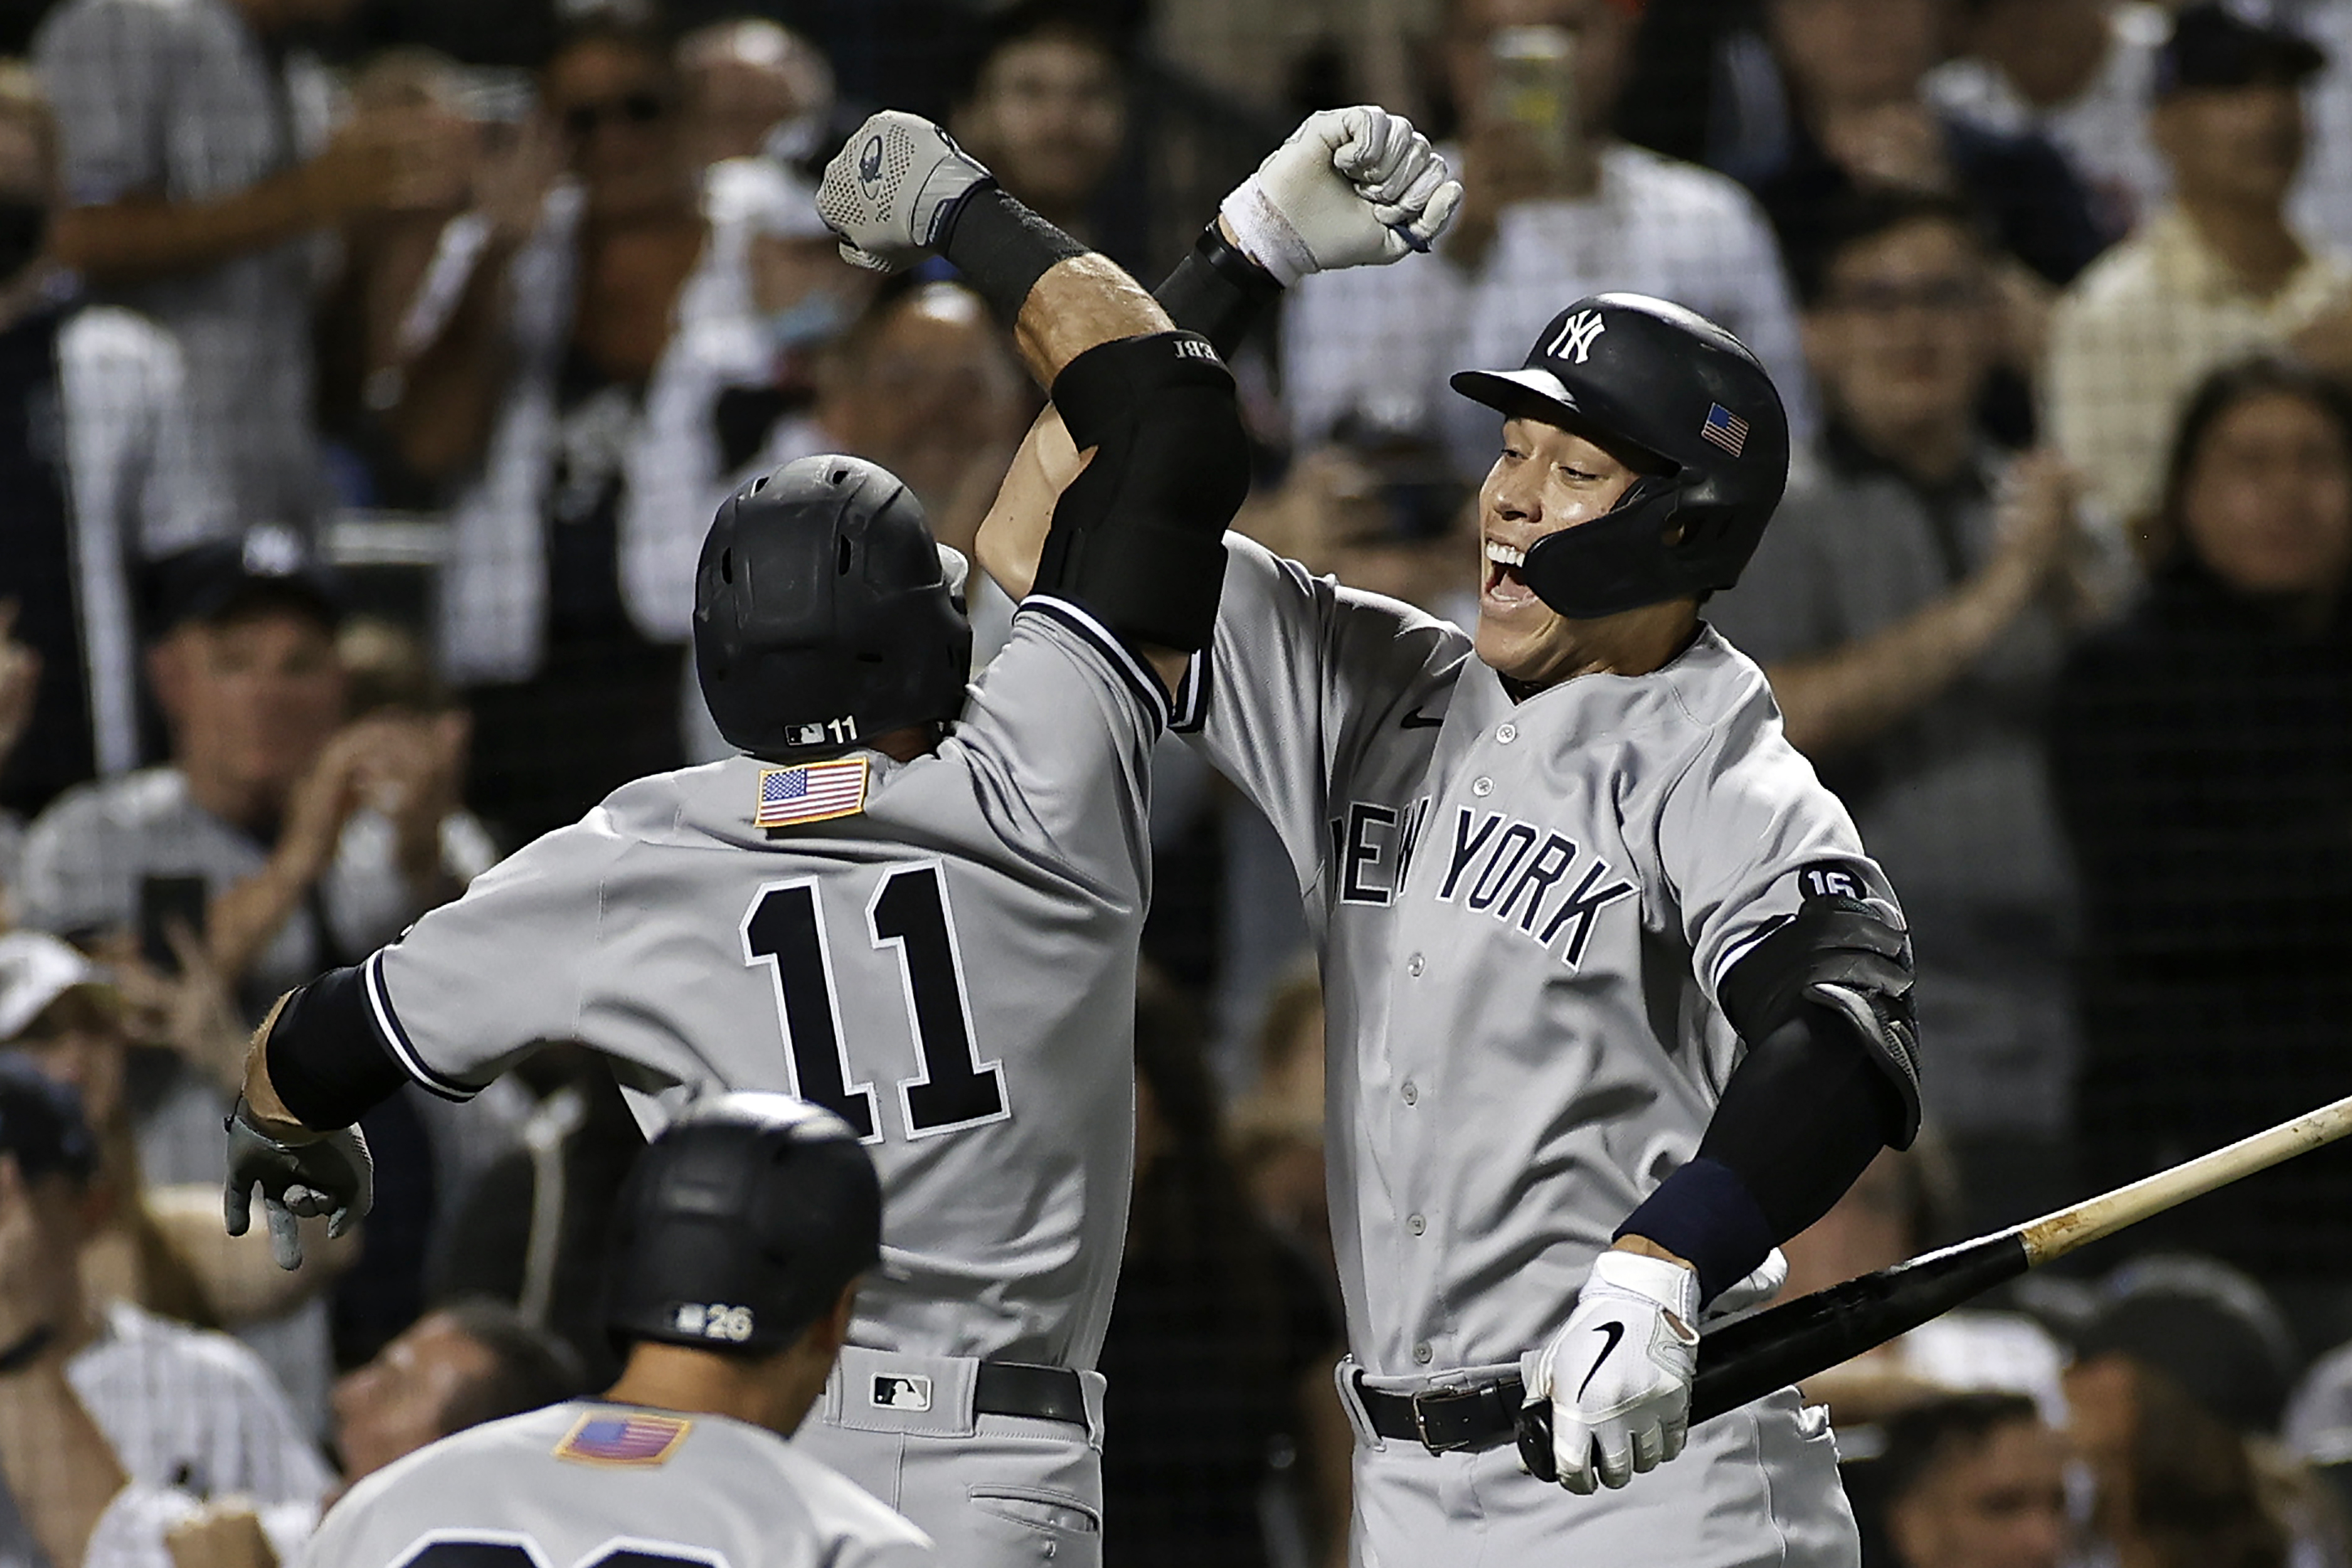 Andrew Velazquez hits his first home run for New York Yankees